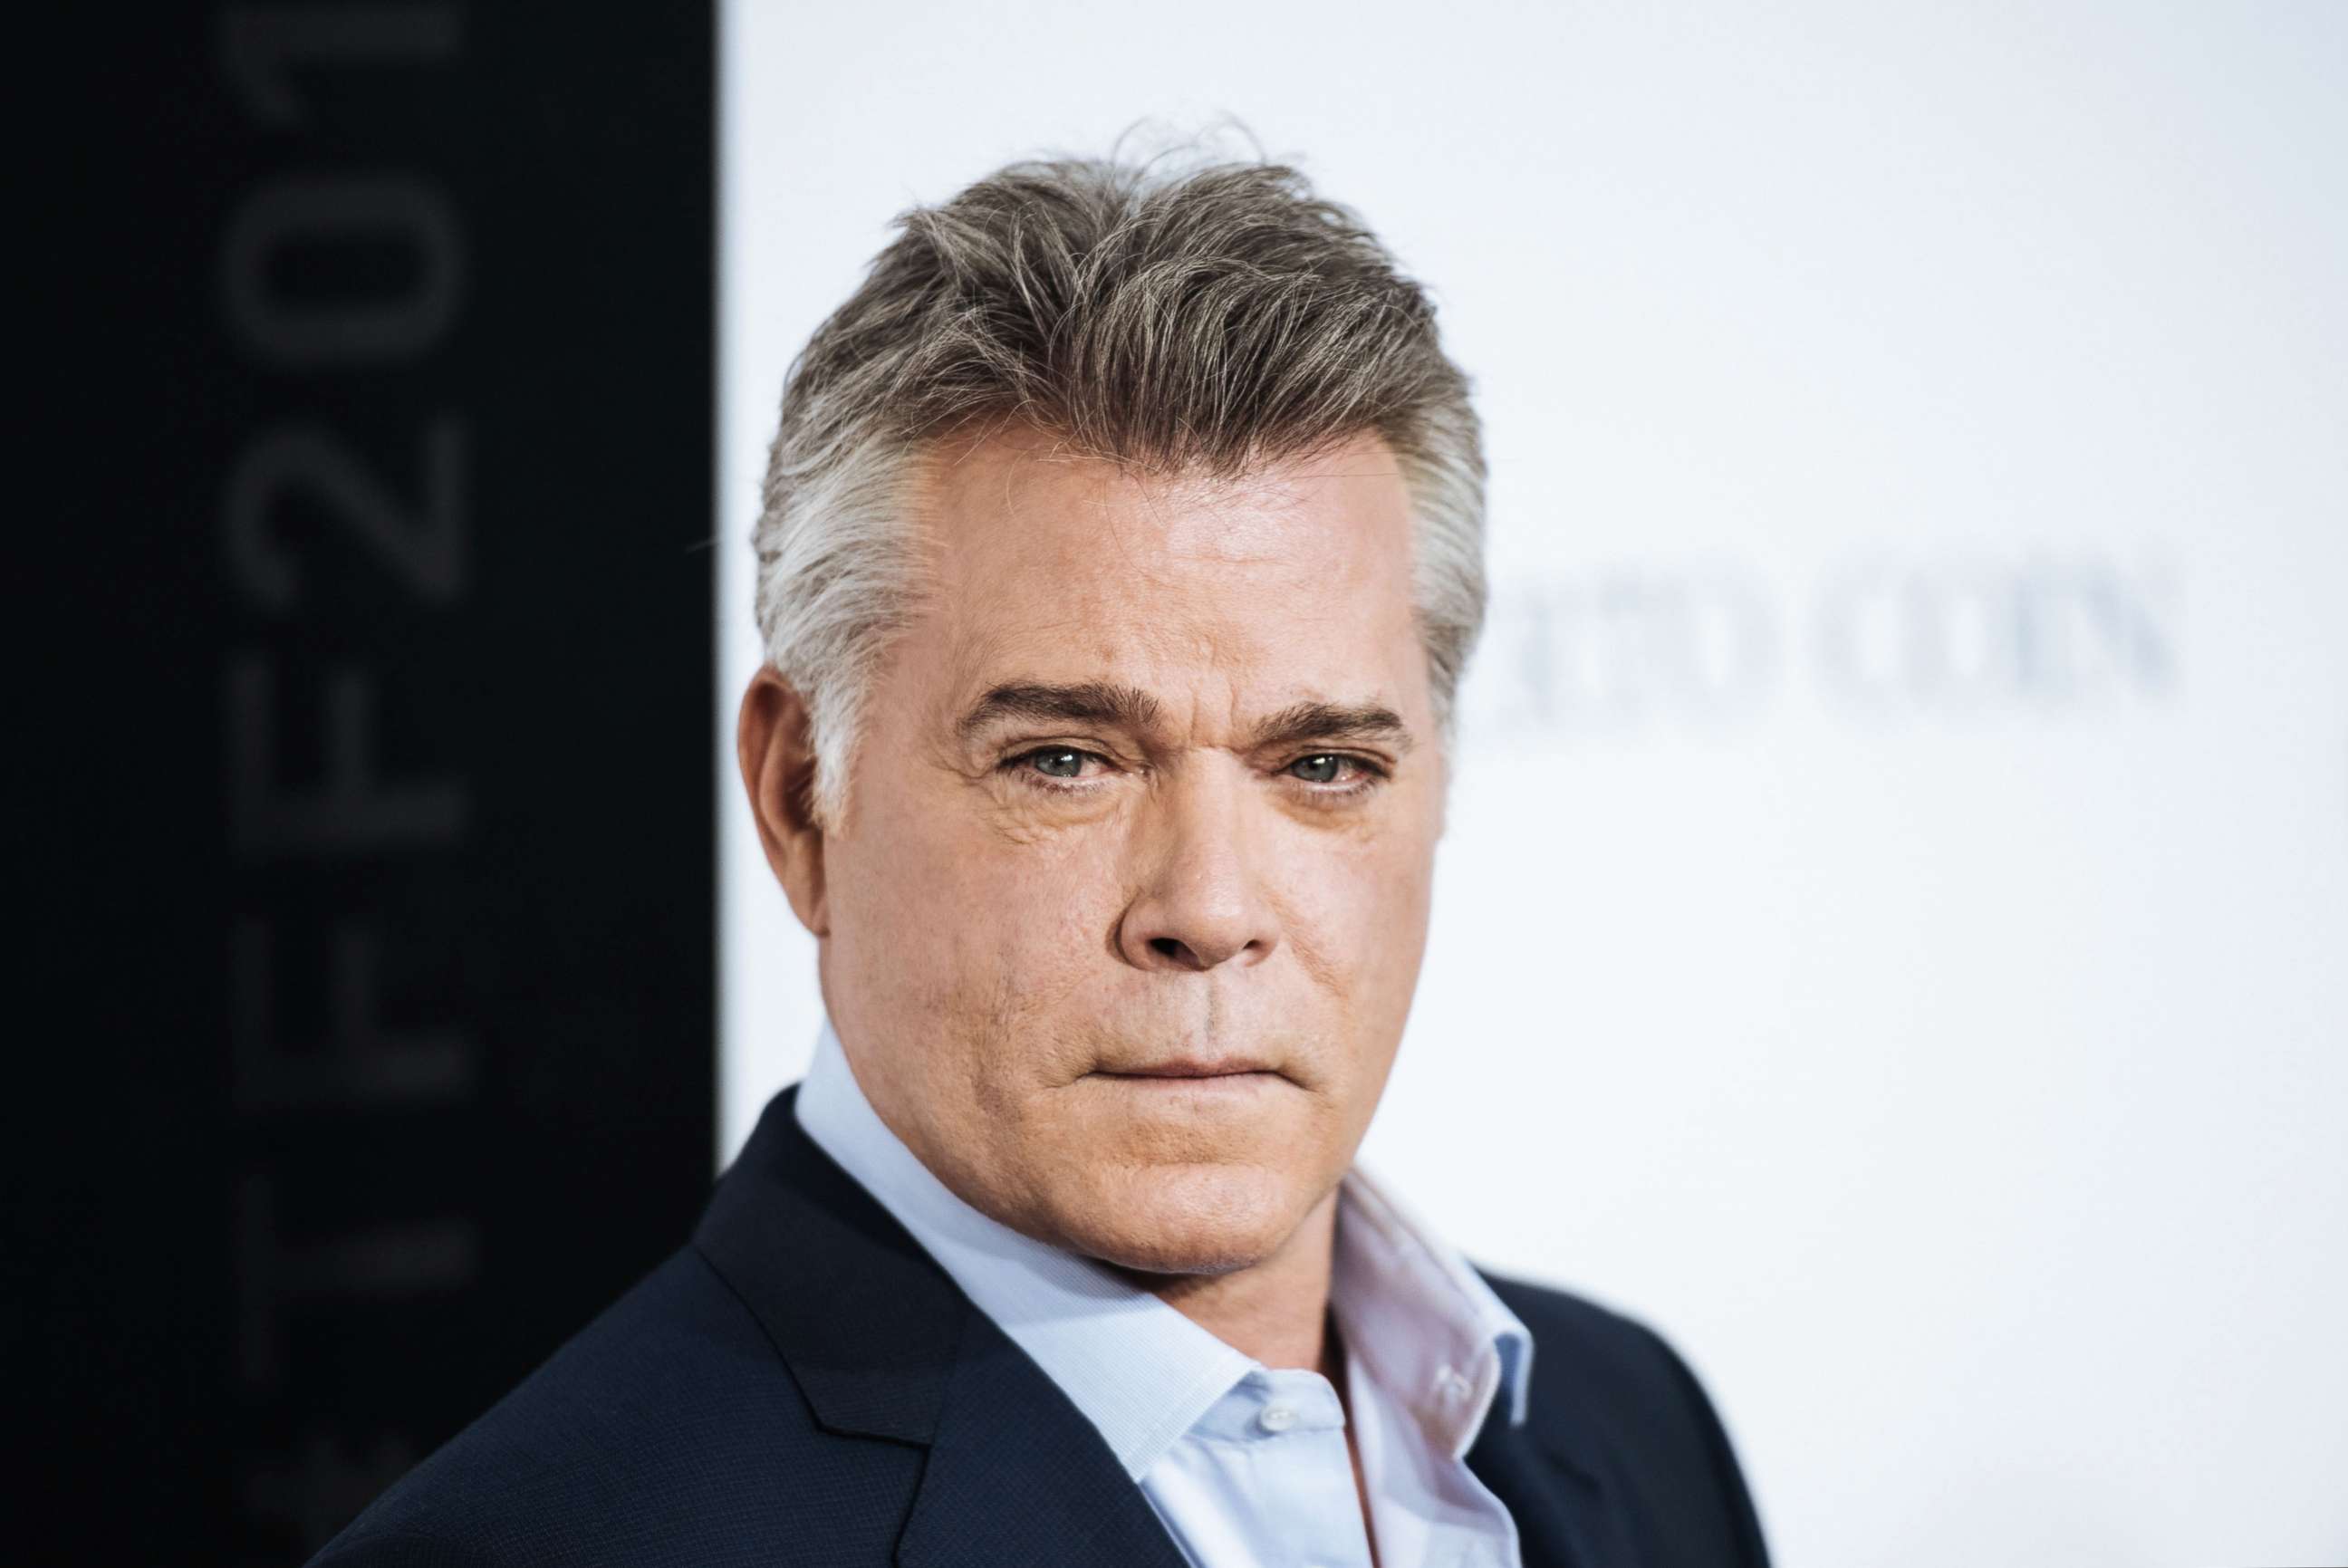 PHOTO: In this April 15, 2015, file photo, Ray Liotta attends a screening of "Goodfellas" during the 2015 Tribeca Film Festival in New York.